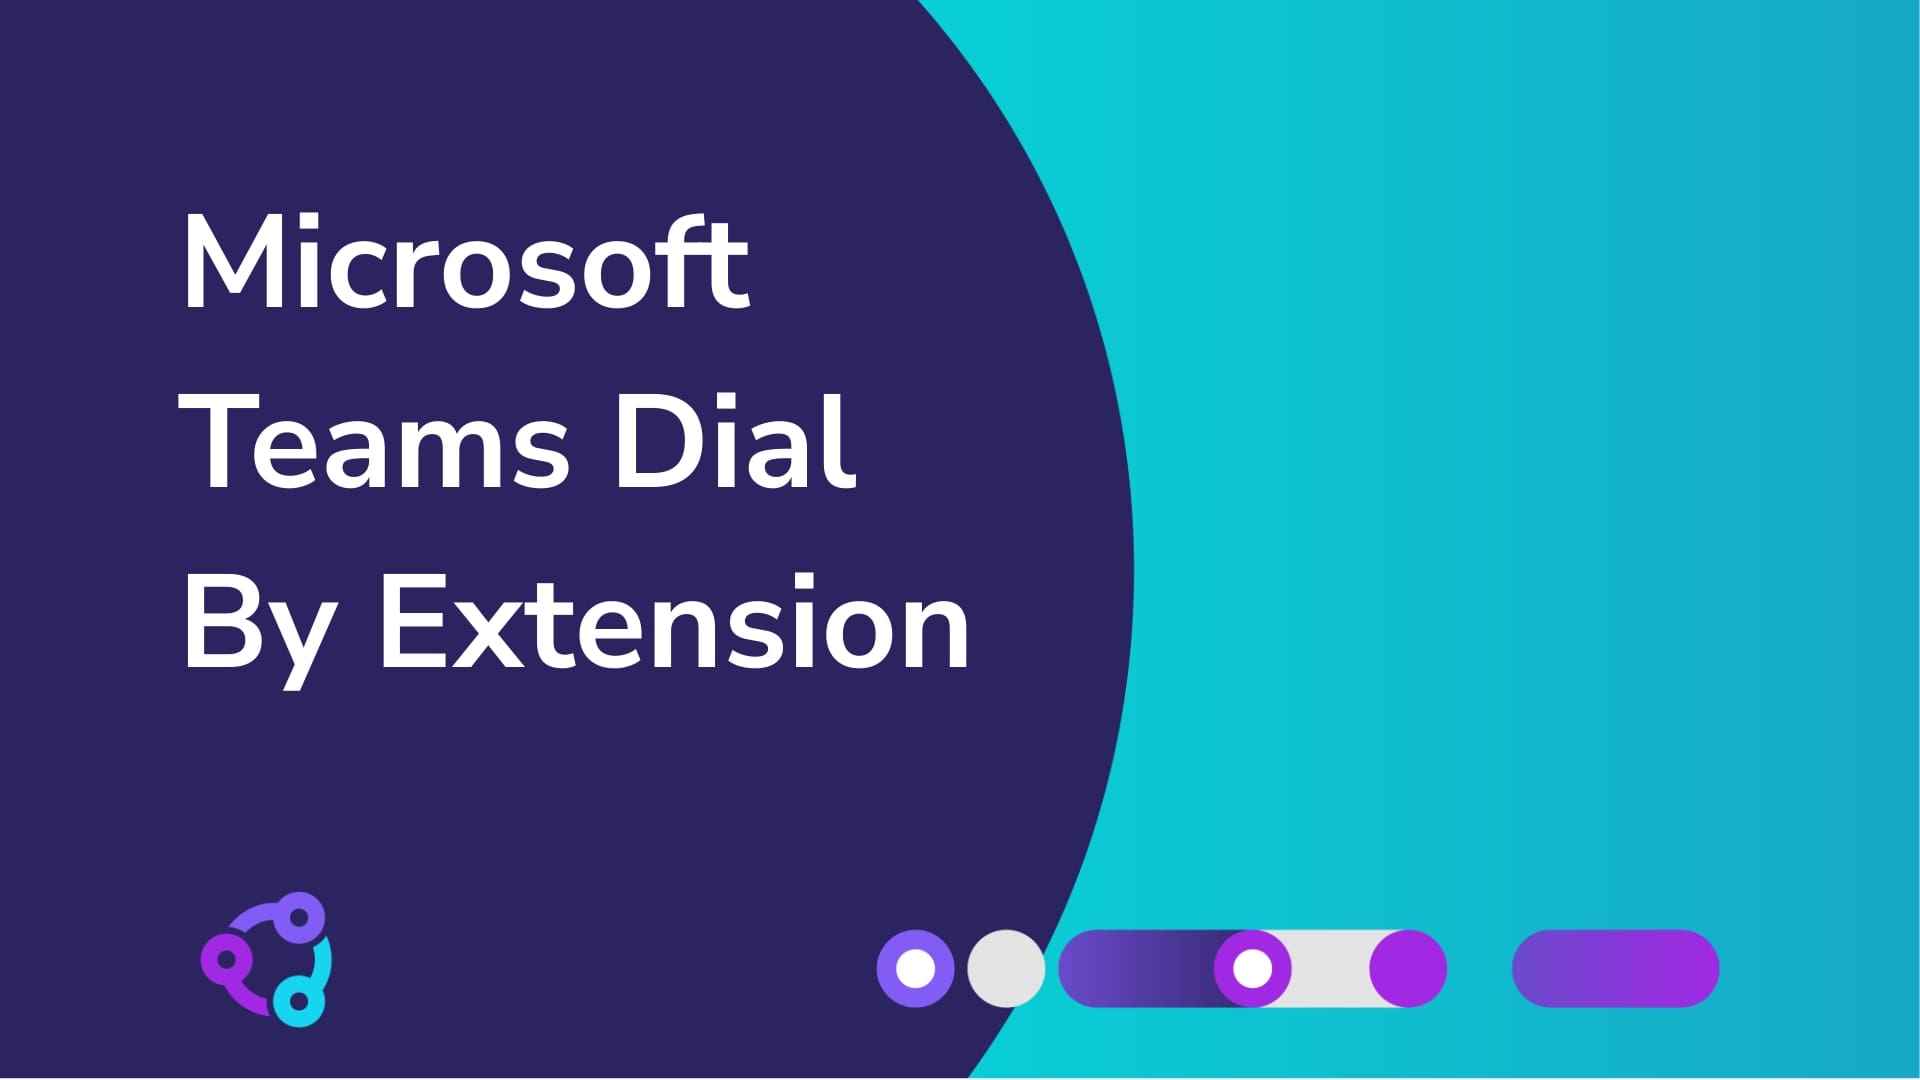 Microsoft Teams dial by extension